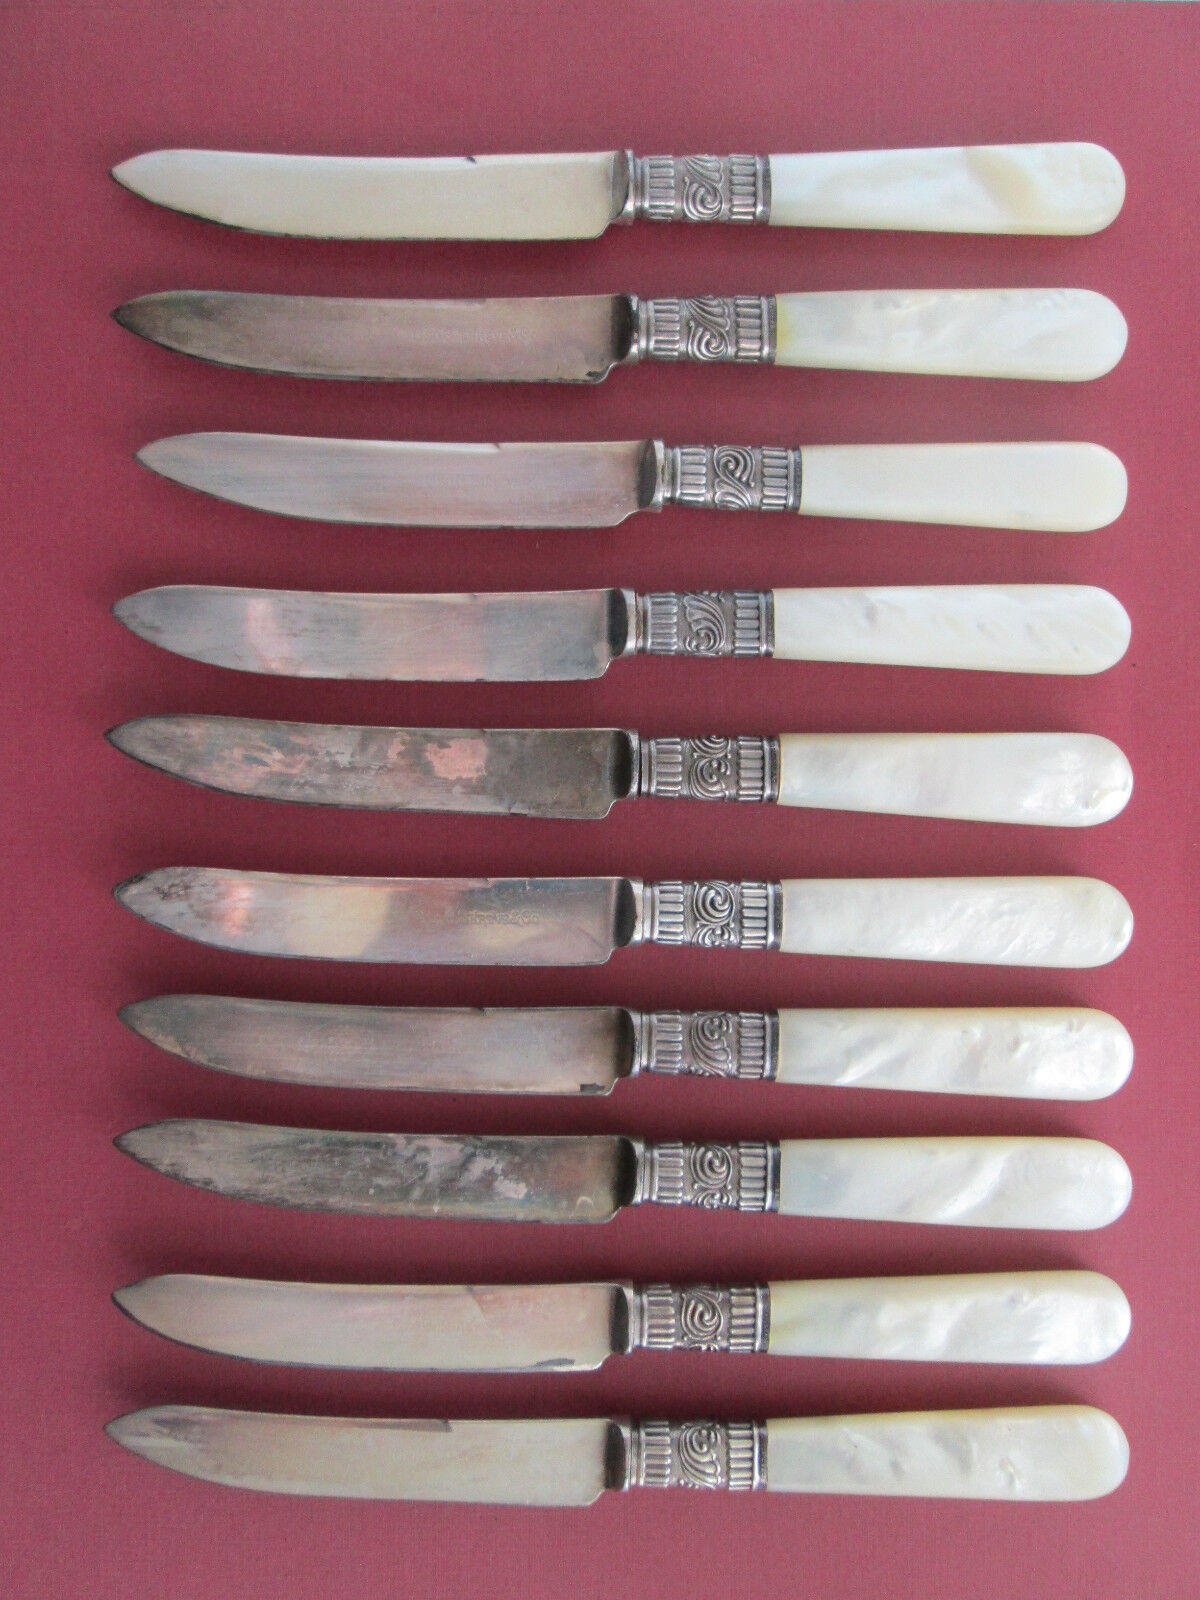 Shreve & Co Jewelry 10 Sterling Silver Knives Lot Antique Knives Mother of Pearl